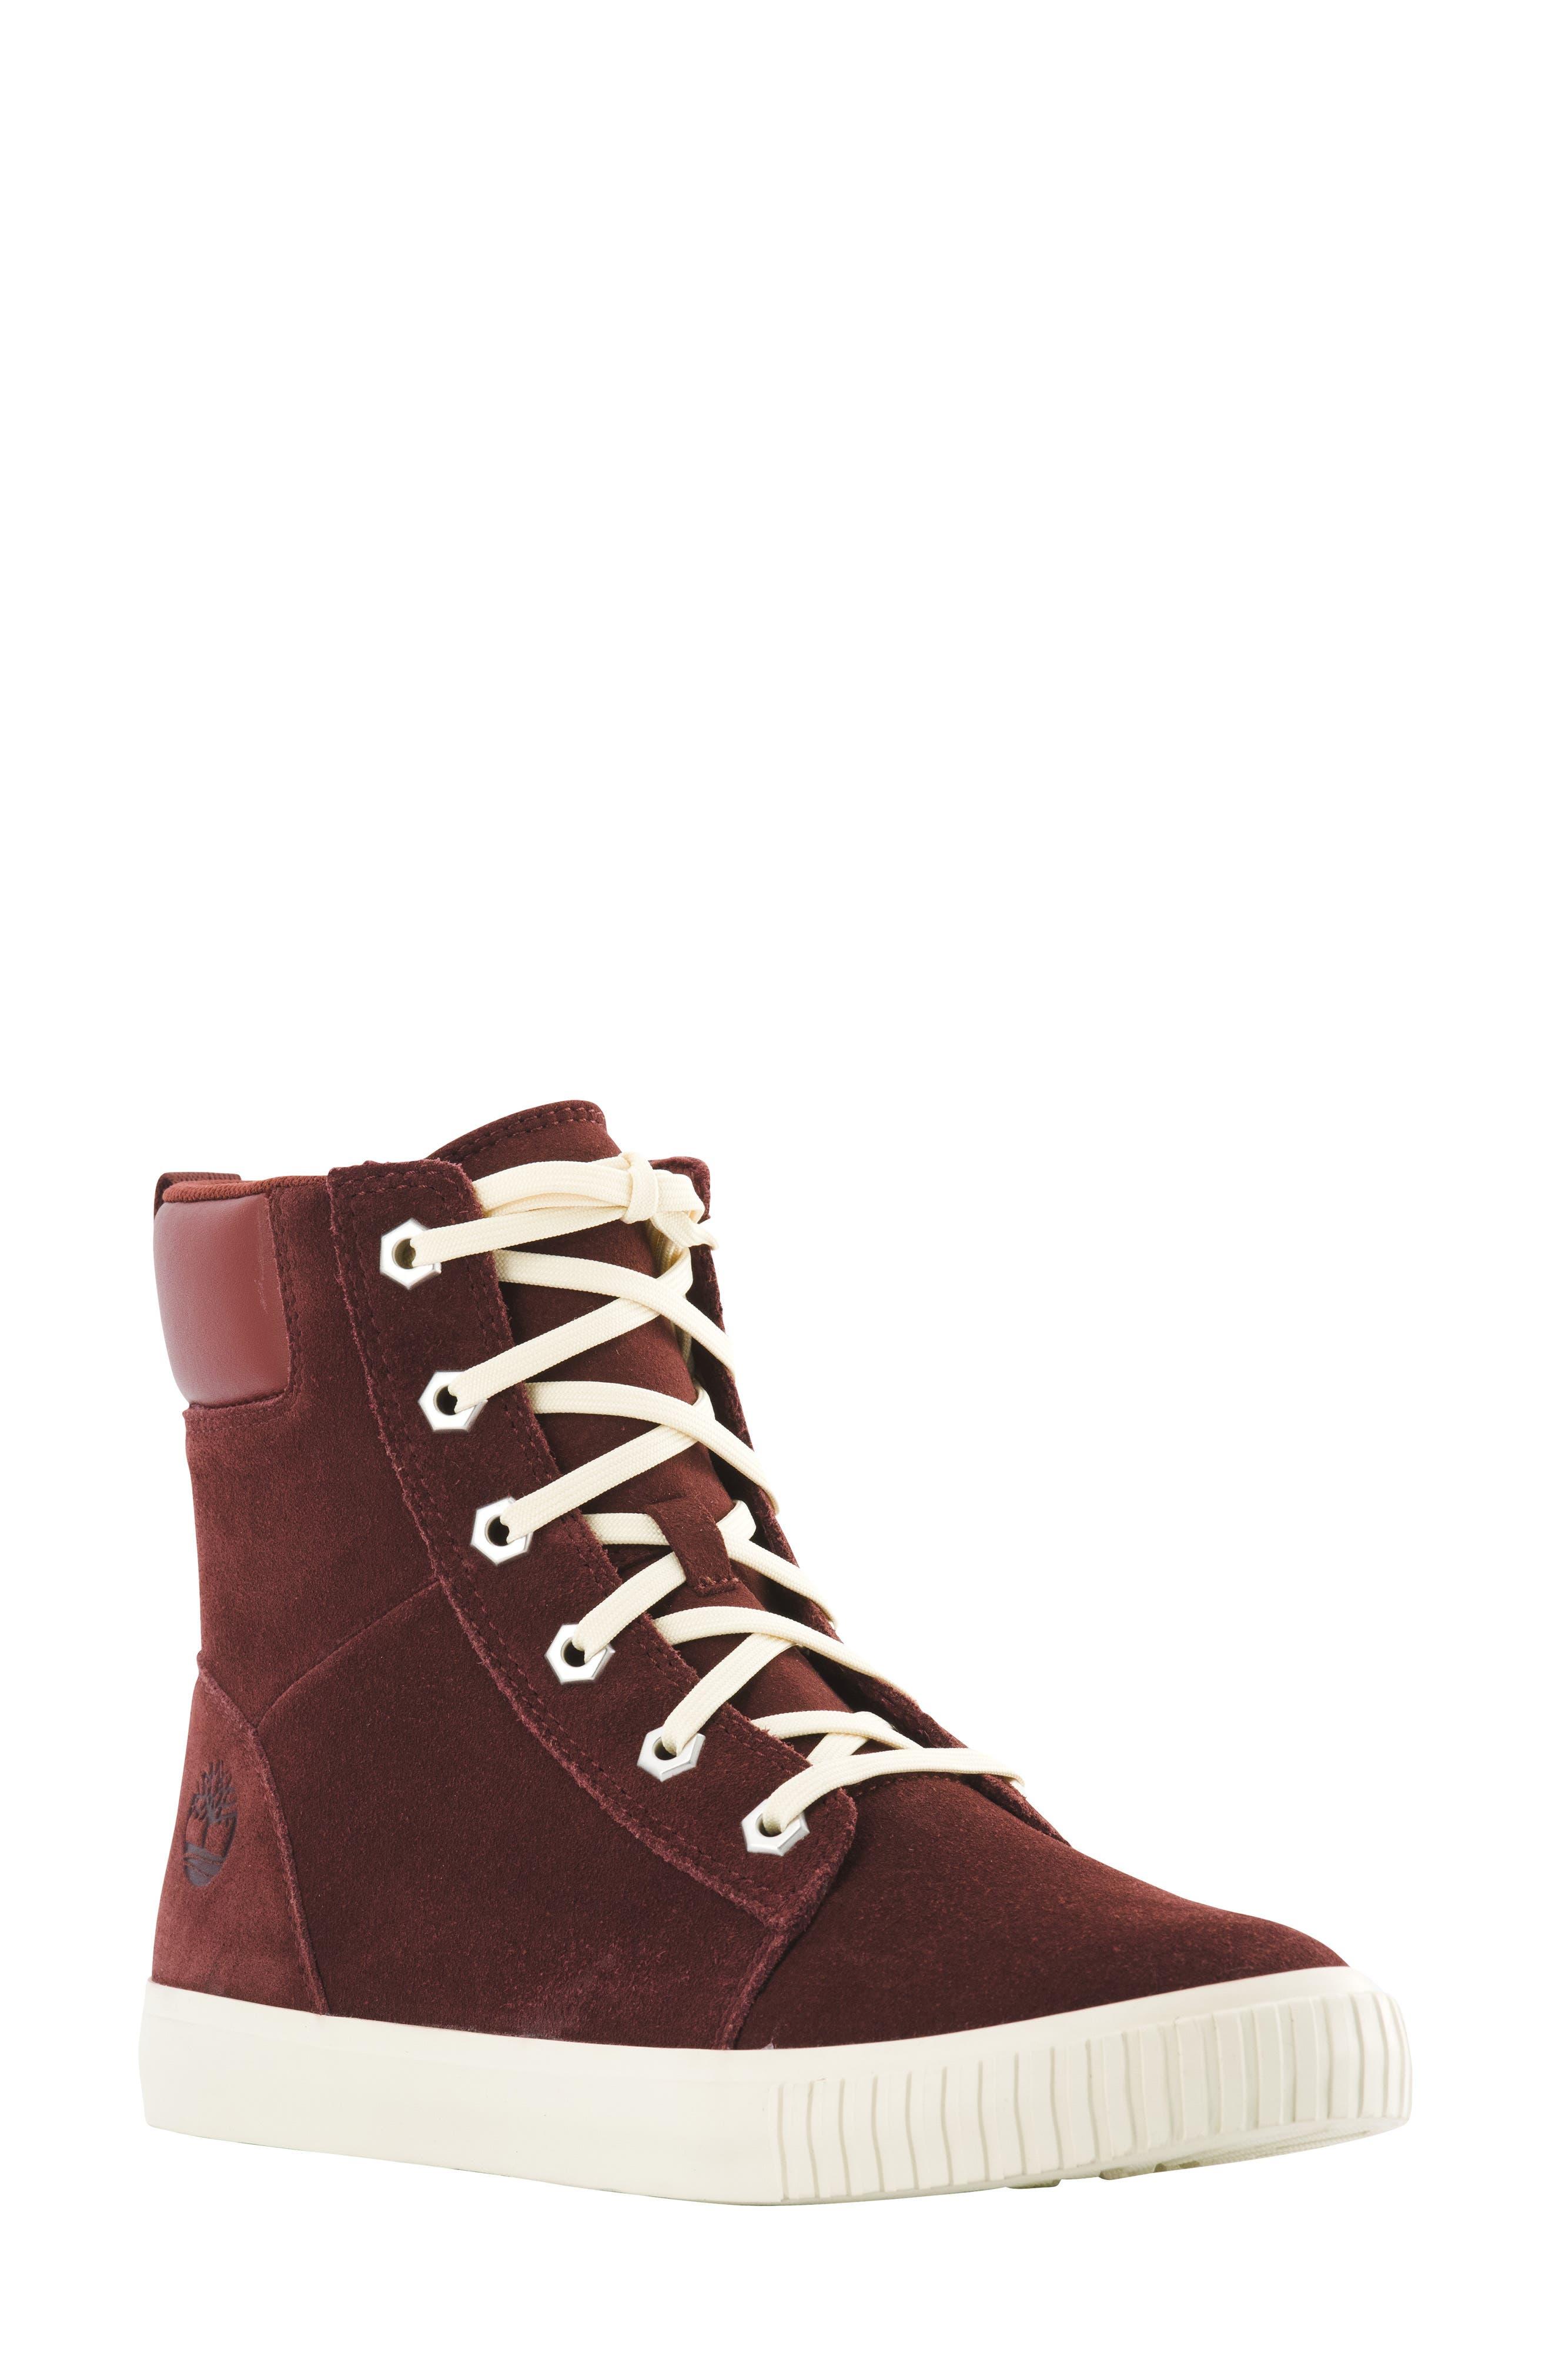 Timberland Skyla Bay Bootie in Brown | Lyst